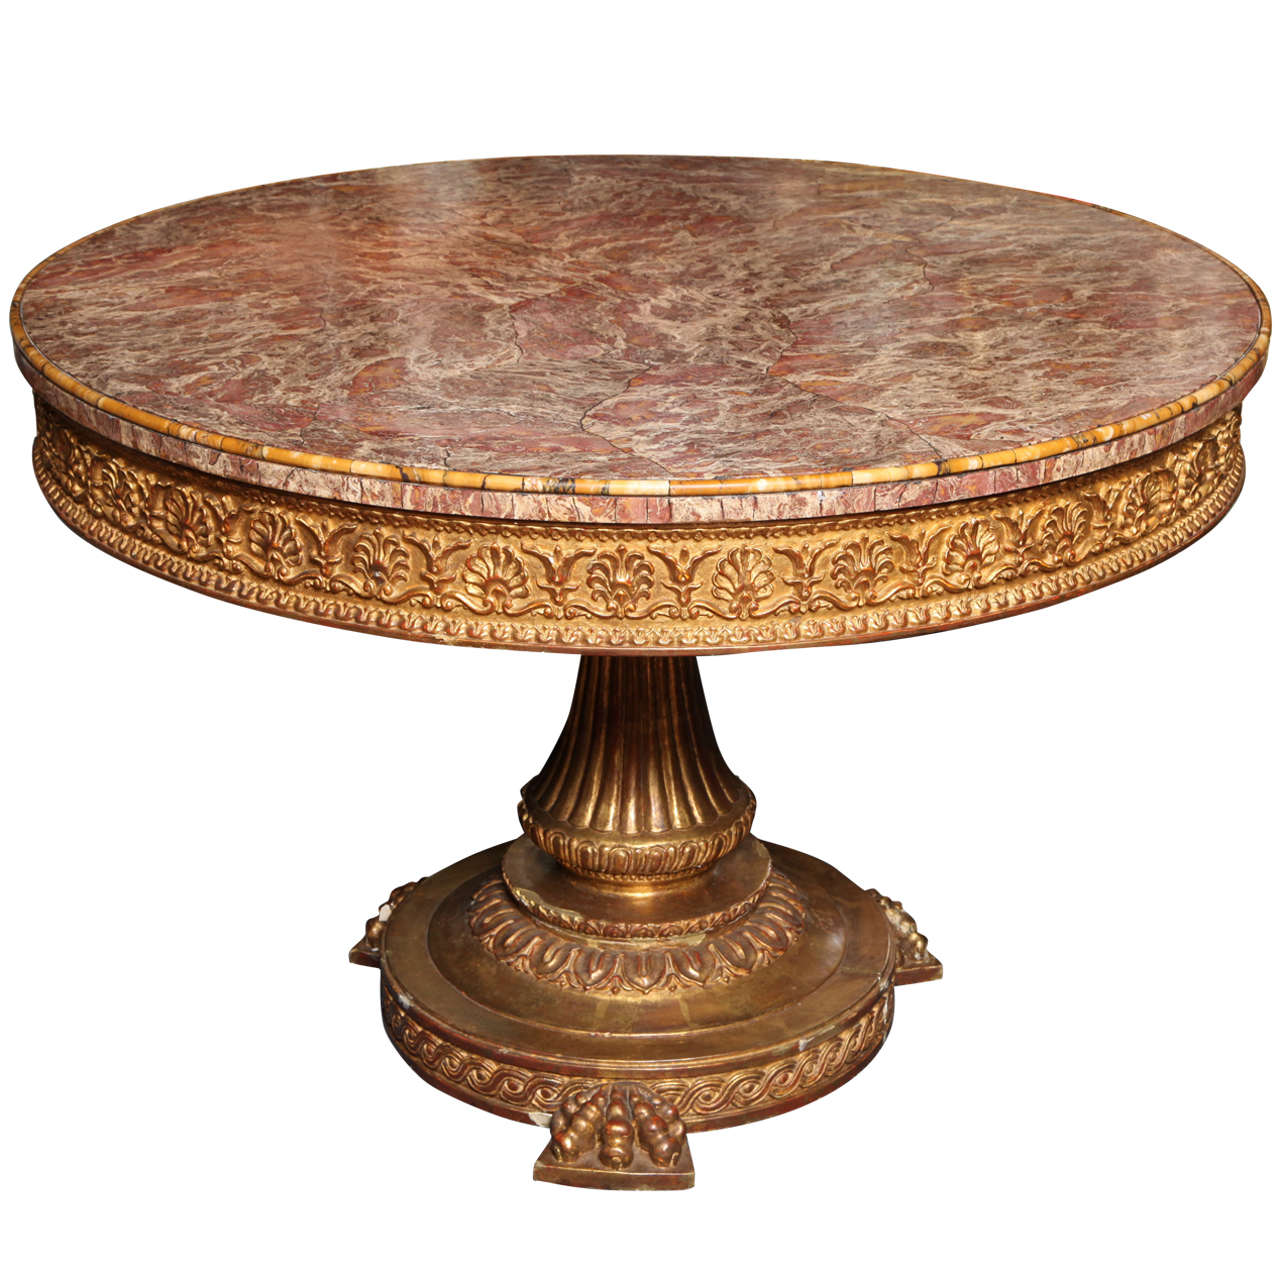 Italian Neoclassical Giltwood and Marble-Top Centre Table